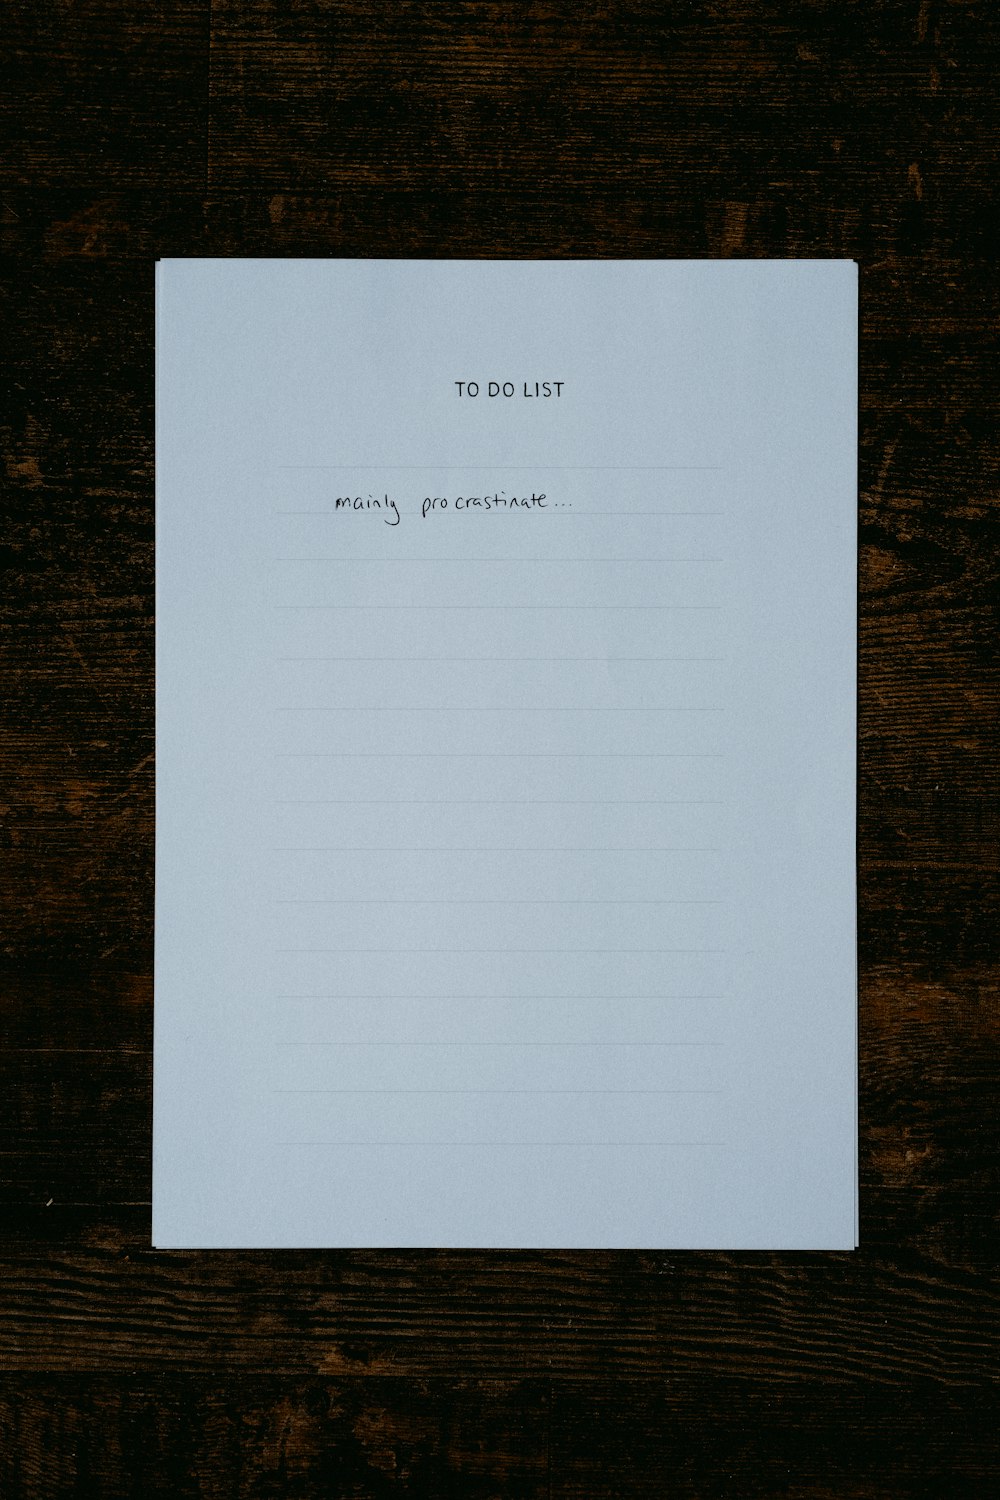 a piece of paper with writing on it